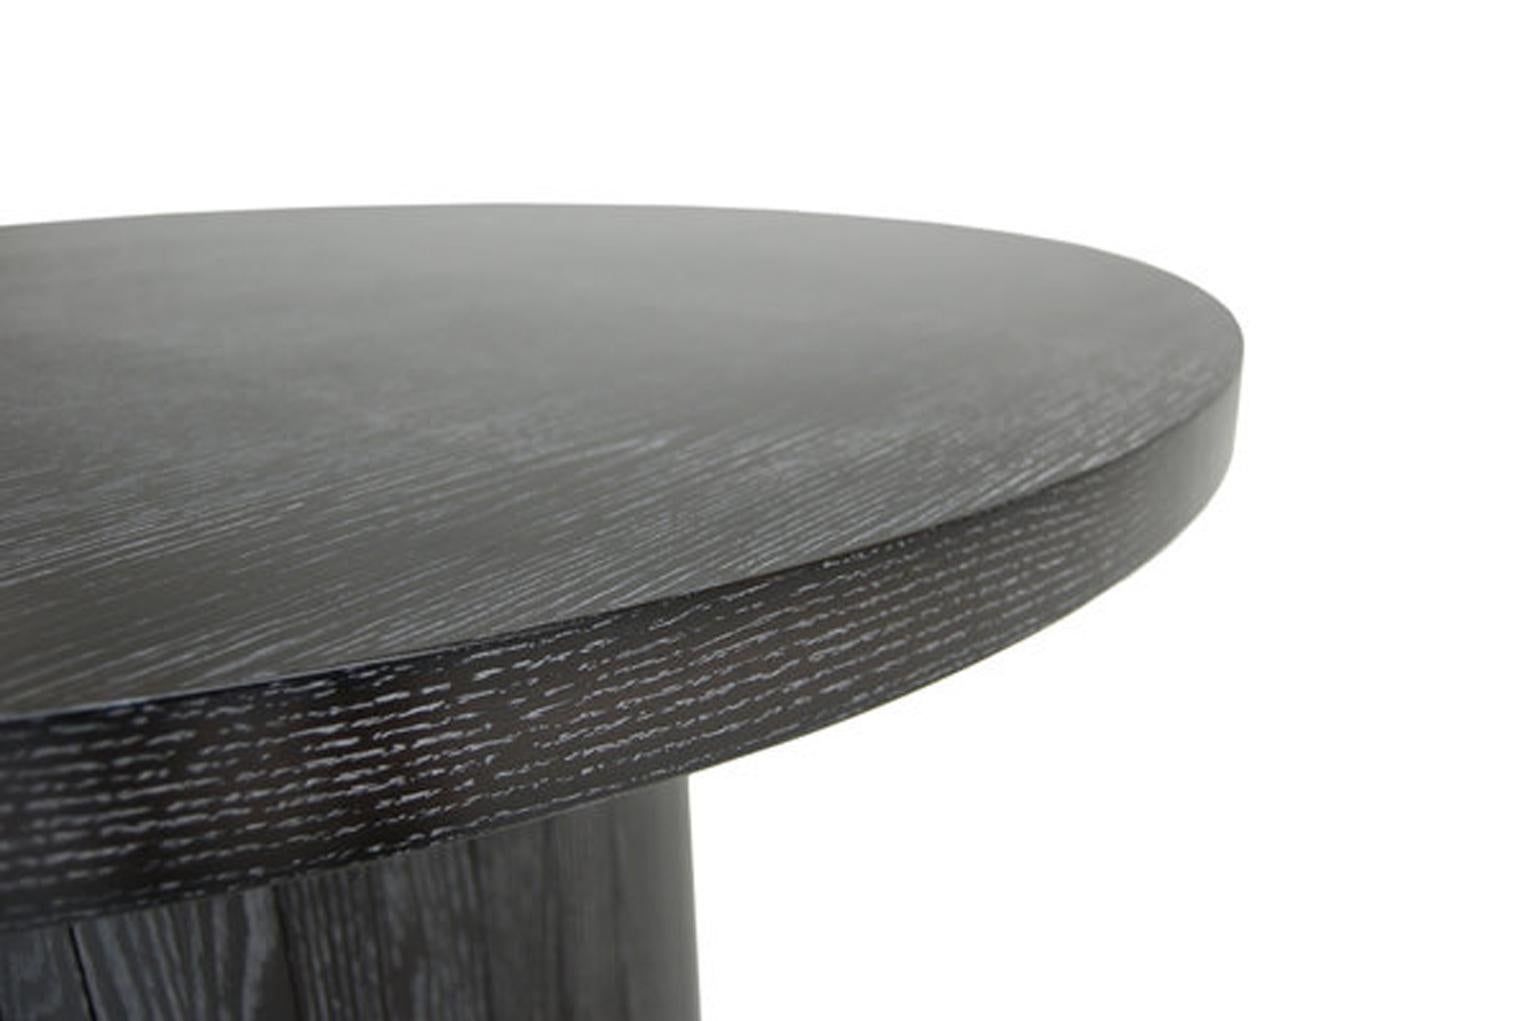 The plank wood table flaunts a cerused oak finish, which highlights the contrast between the grey surface and lightened grain, evoking a bygone era of glamour and craftsmanship.